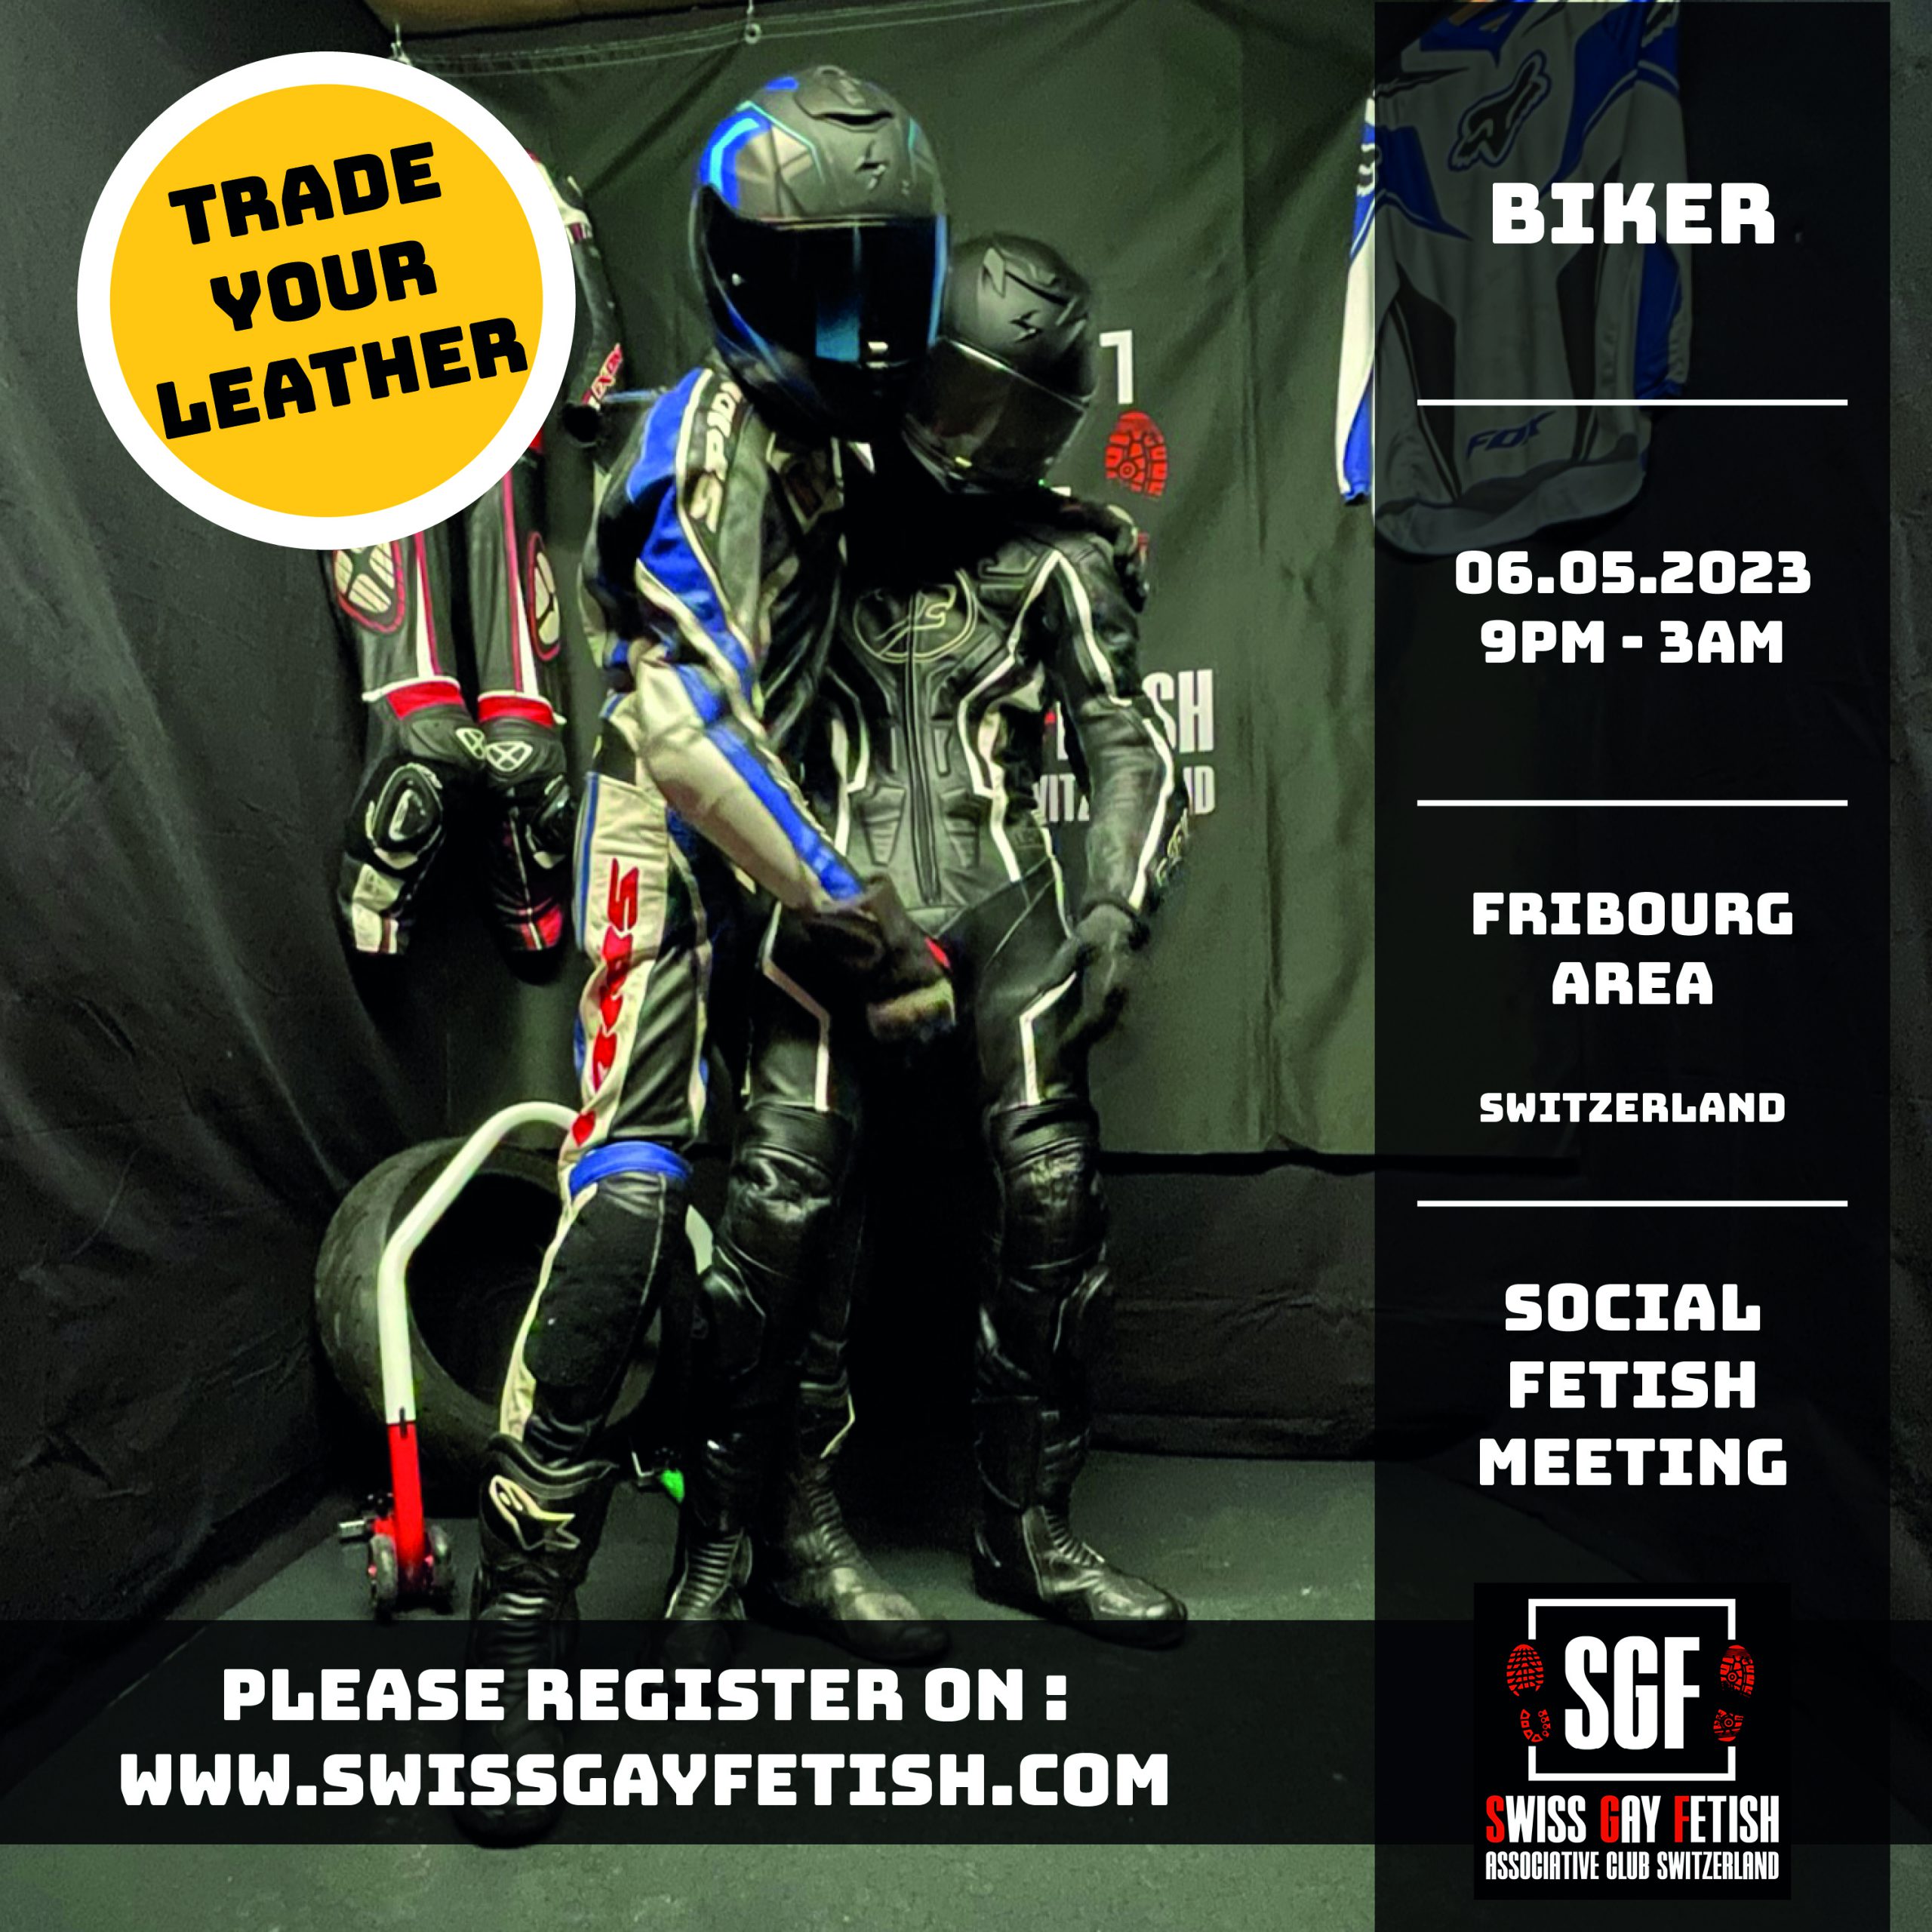 You are currently viewing BIKER | TRADE LEATHER | 06.05.2023